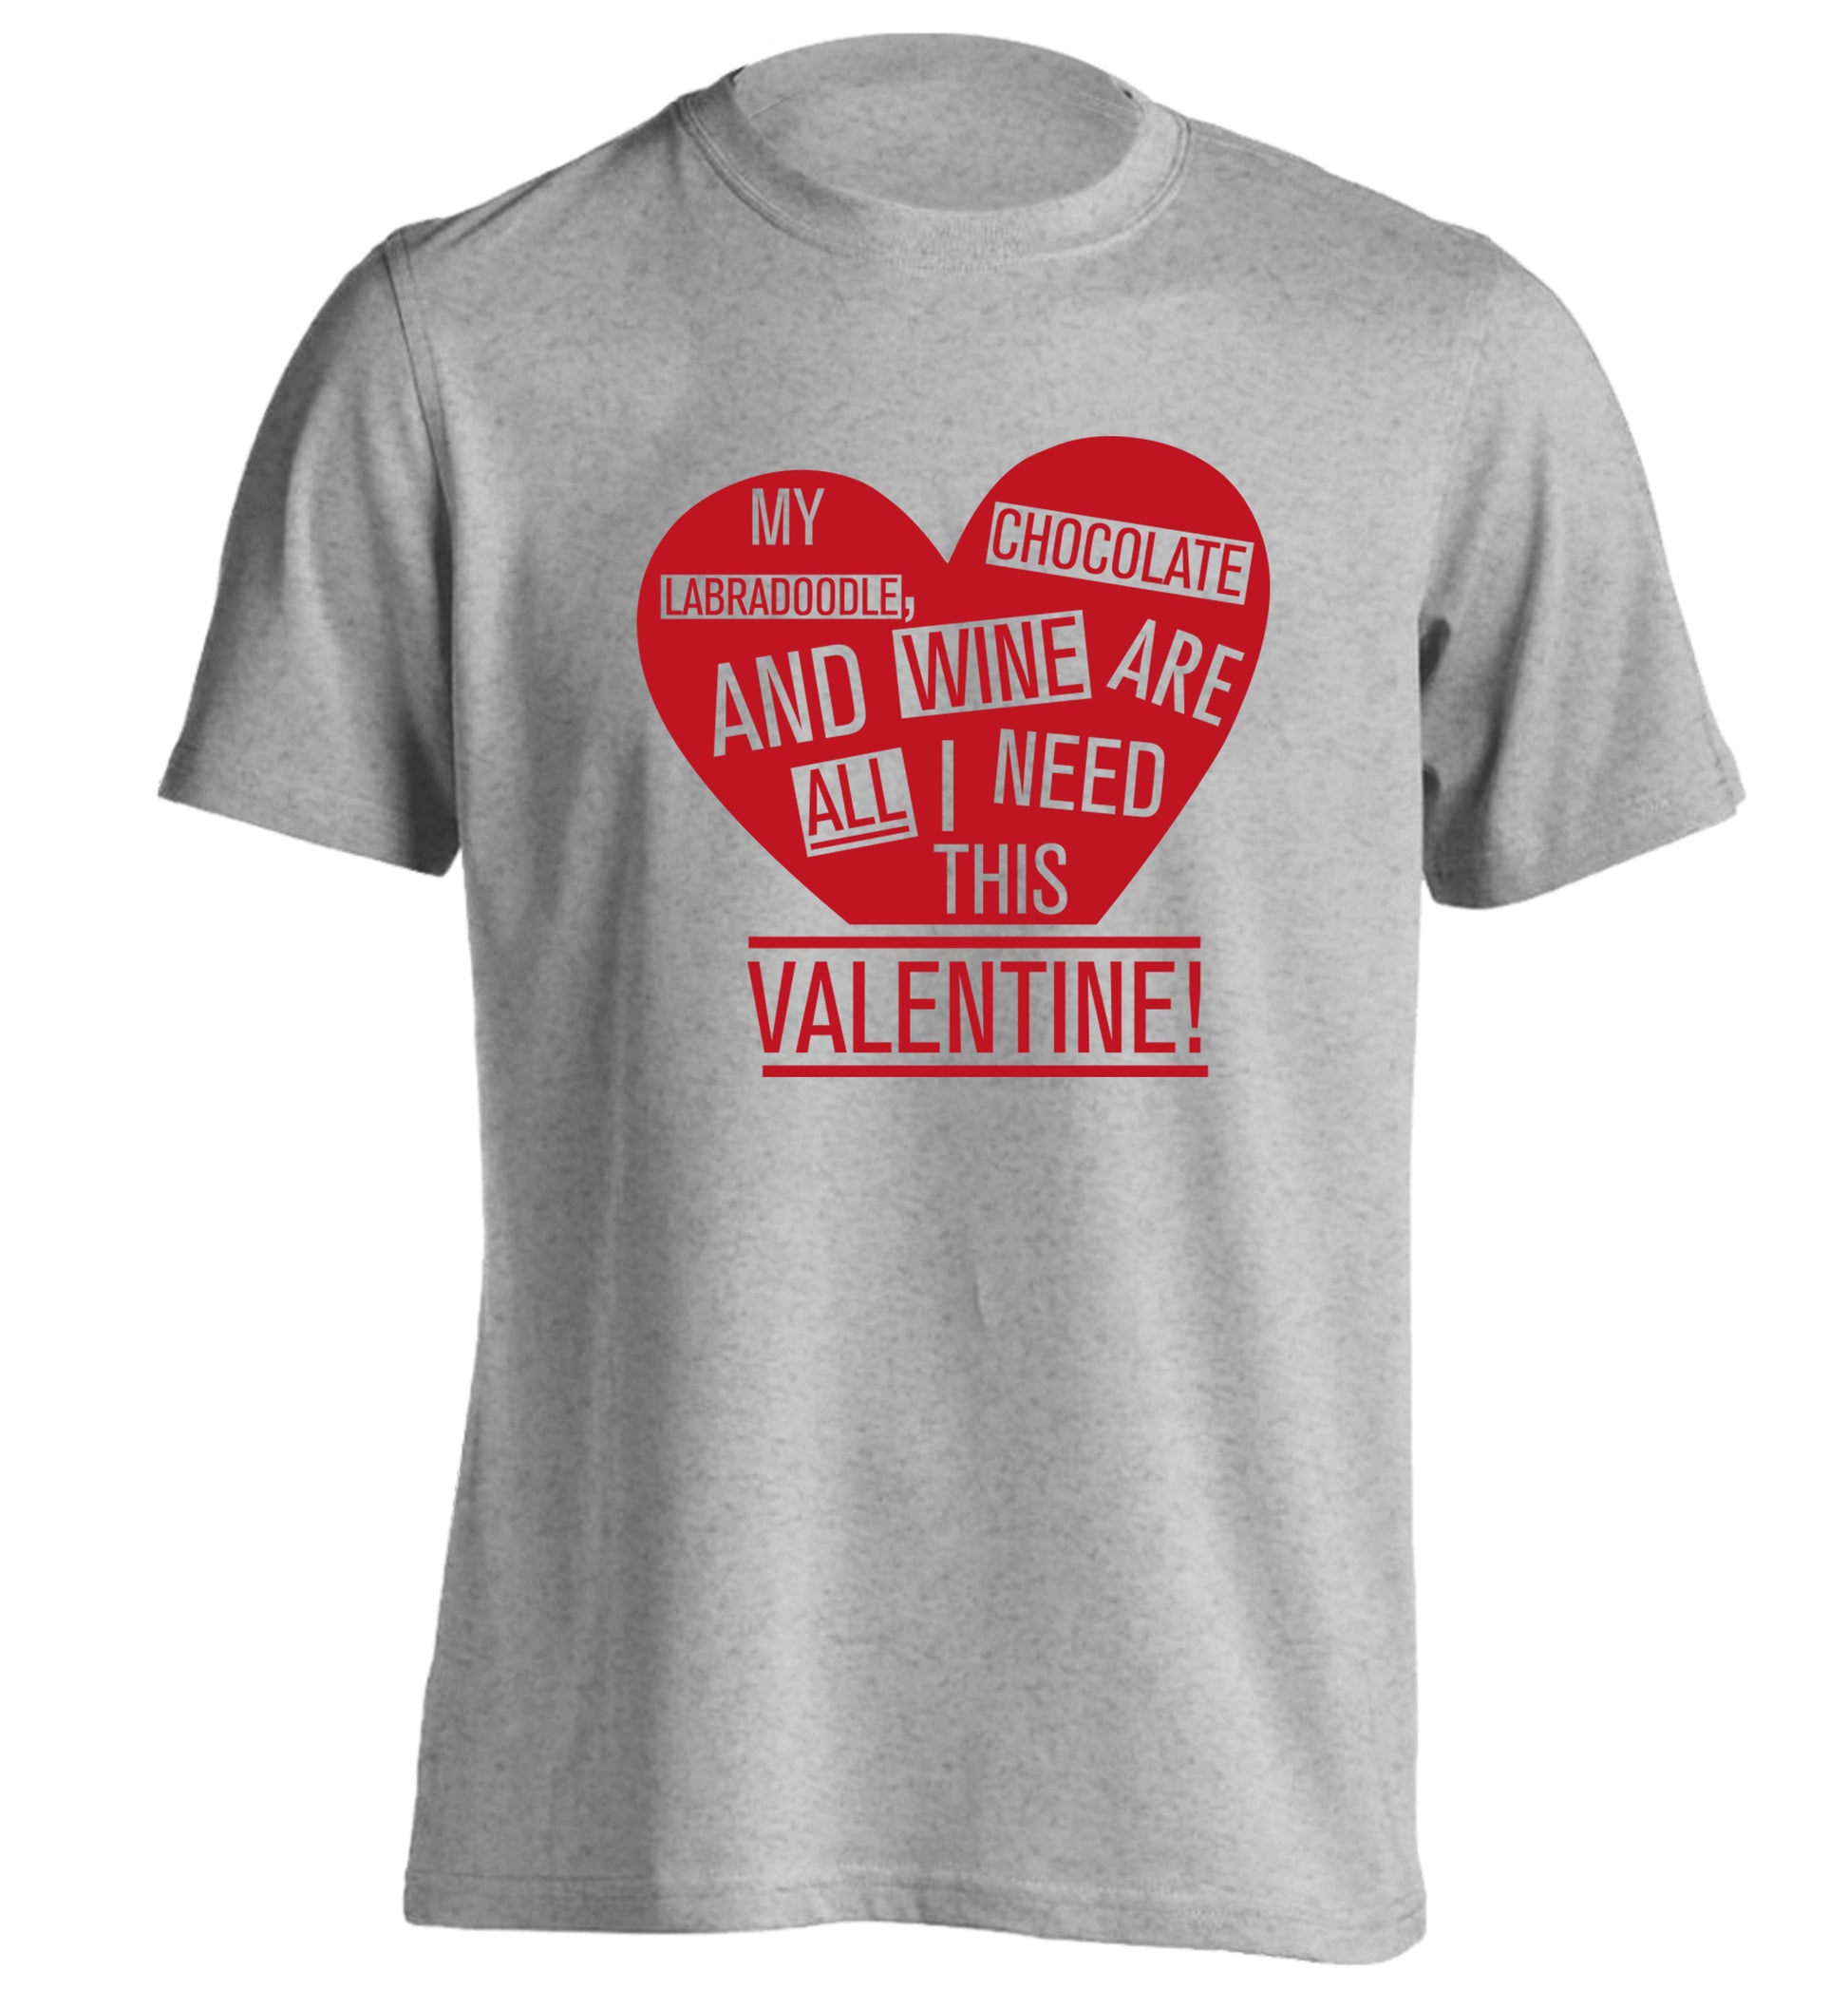 My labradoodle, chocolate and wine are all I need this valentine! adults unisex grey Tshirt 2XL